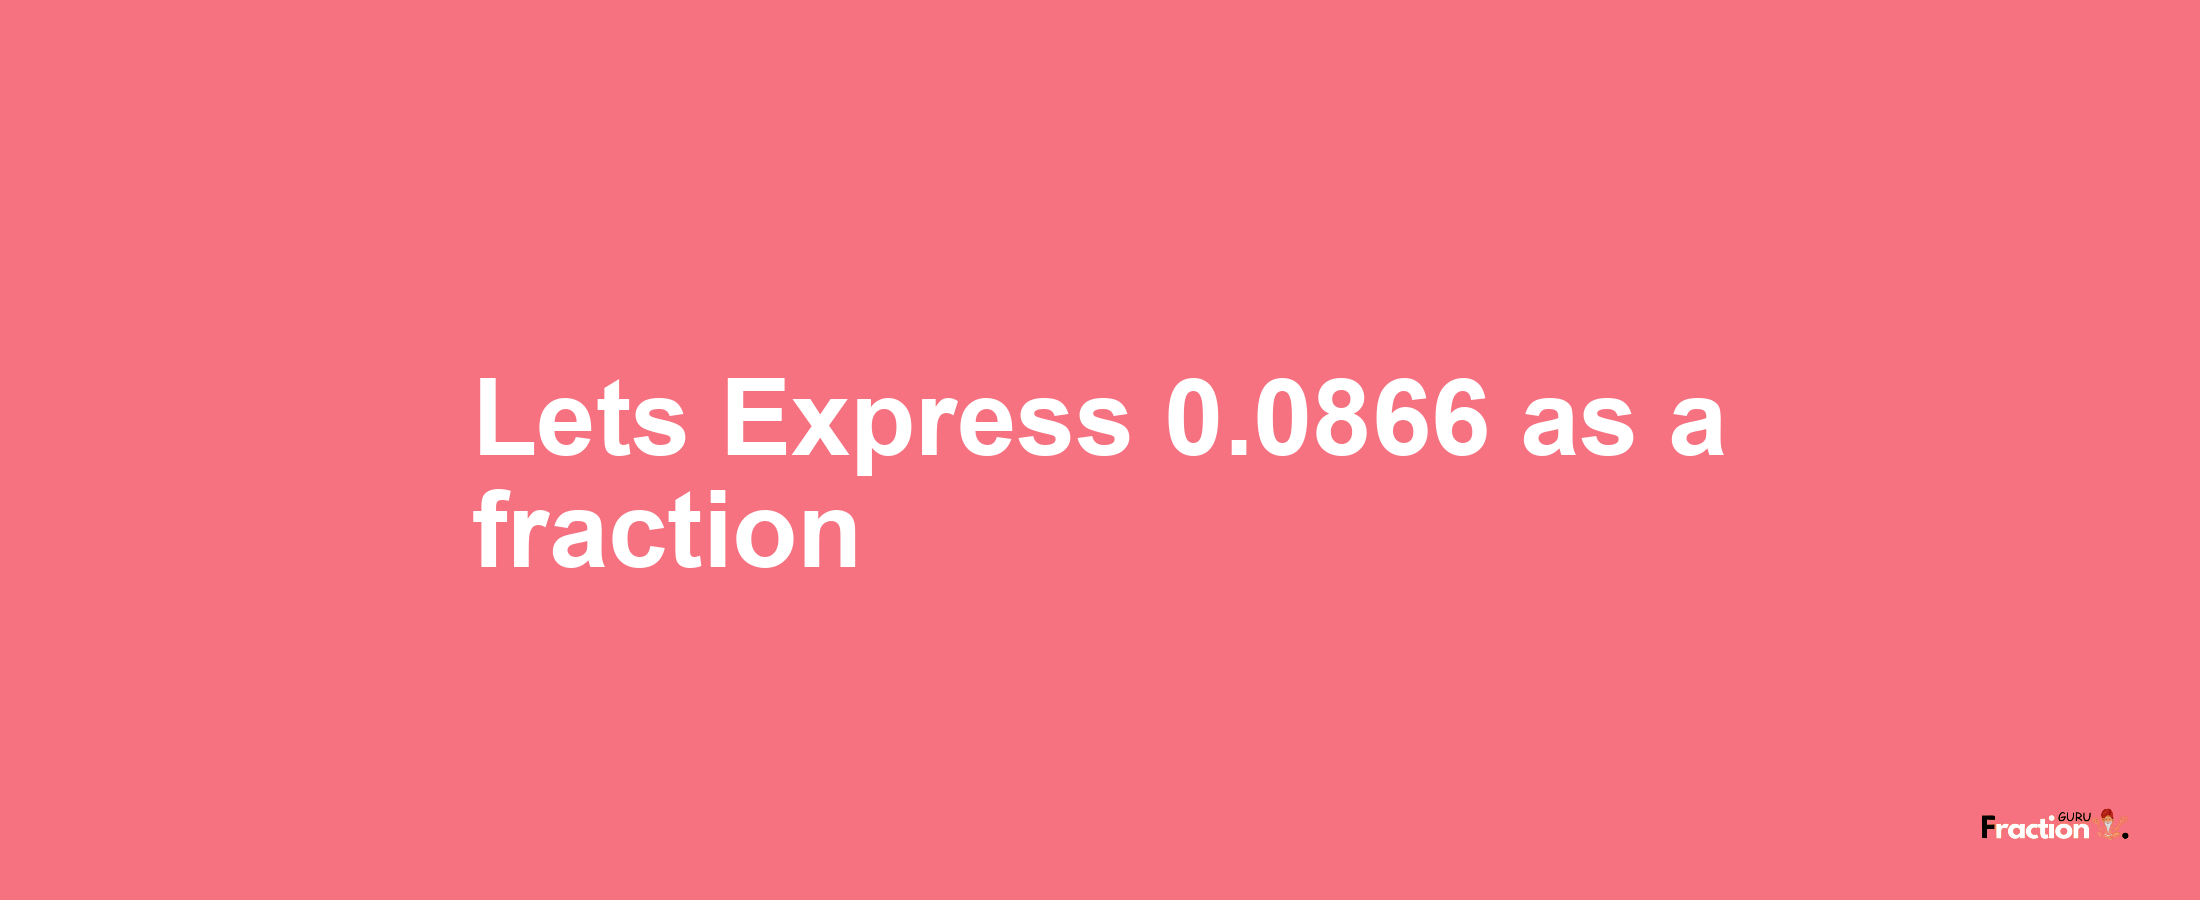 Lets Express 0.0866 as afraction